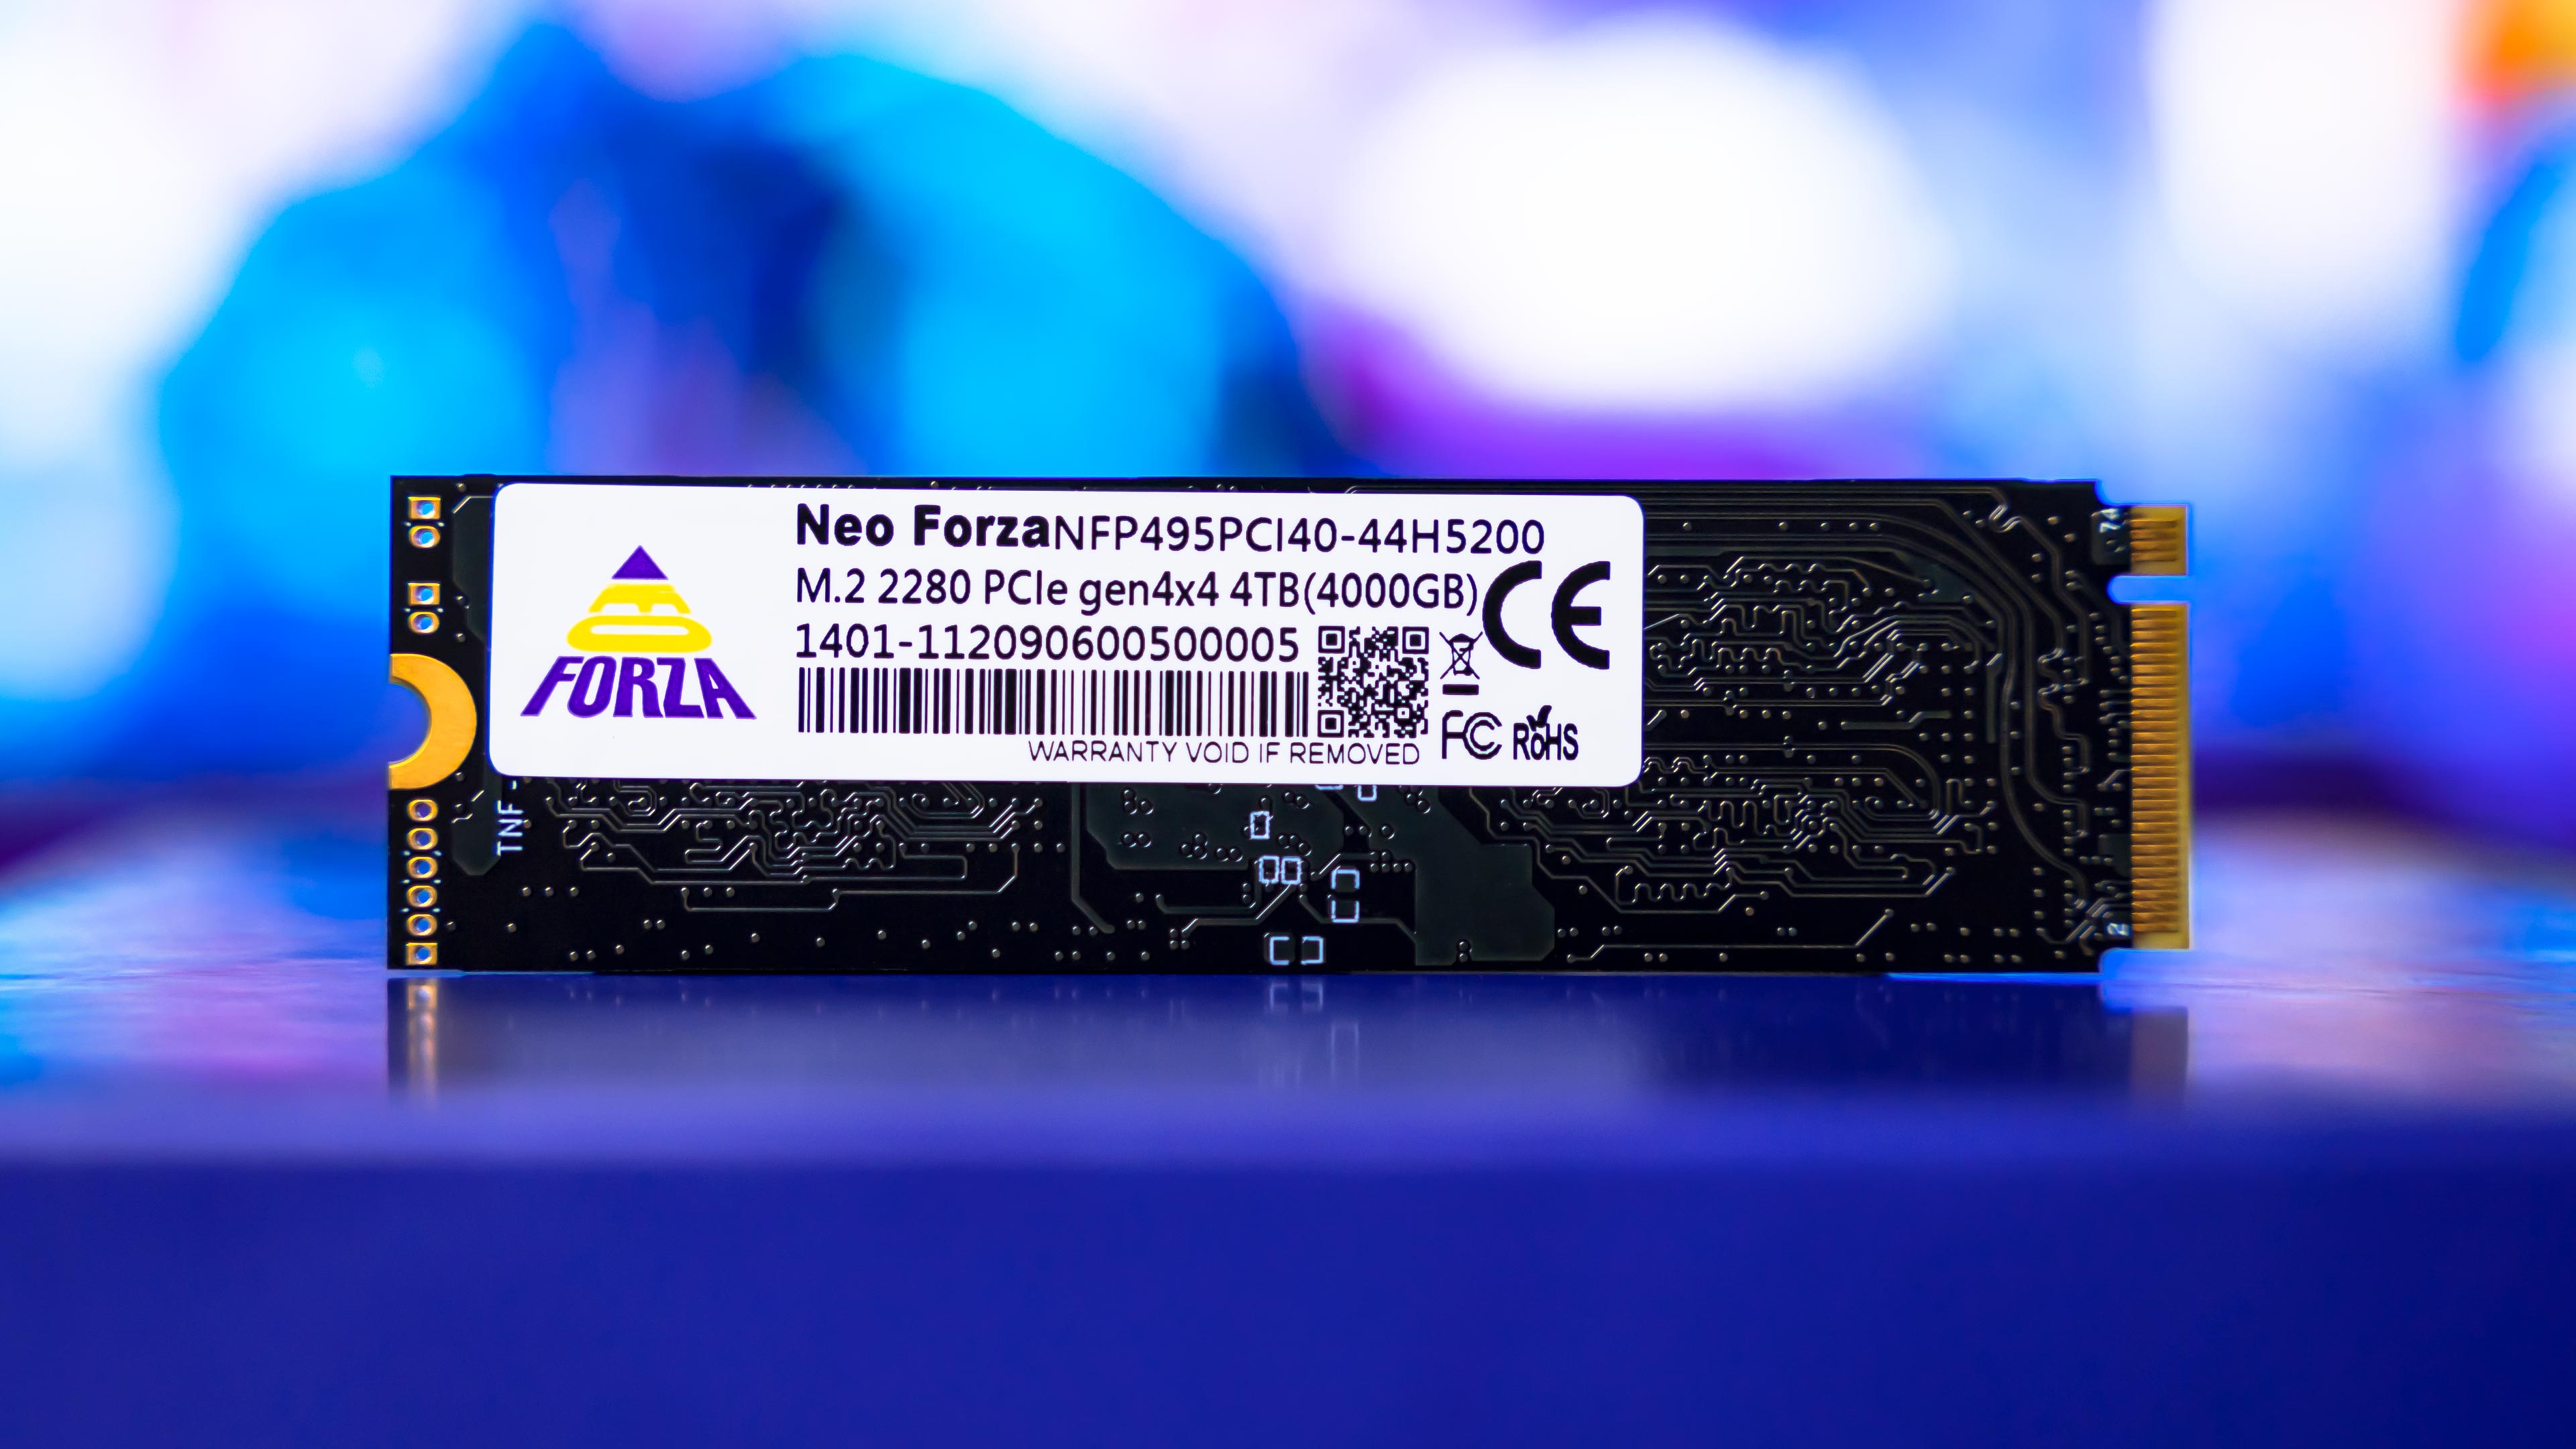 Neo Forza NFP495 4TB SSD M.2 (2)